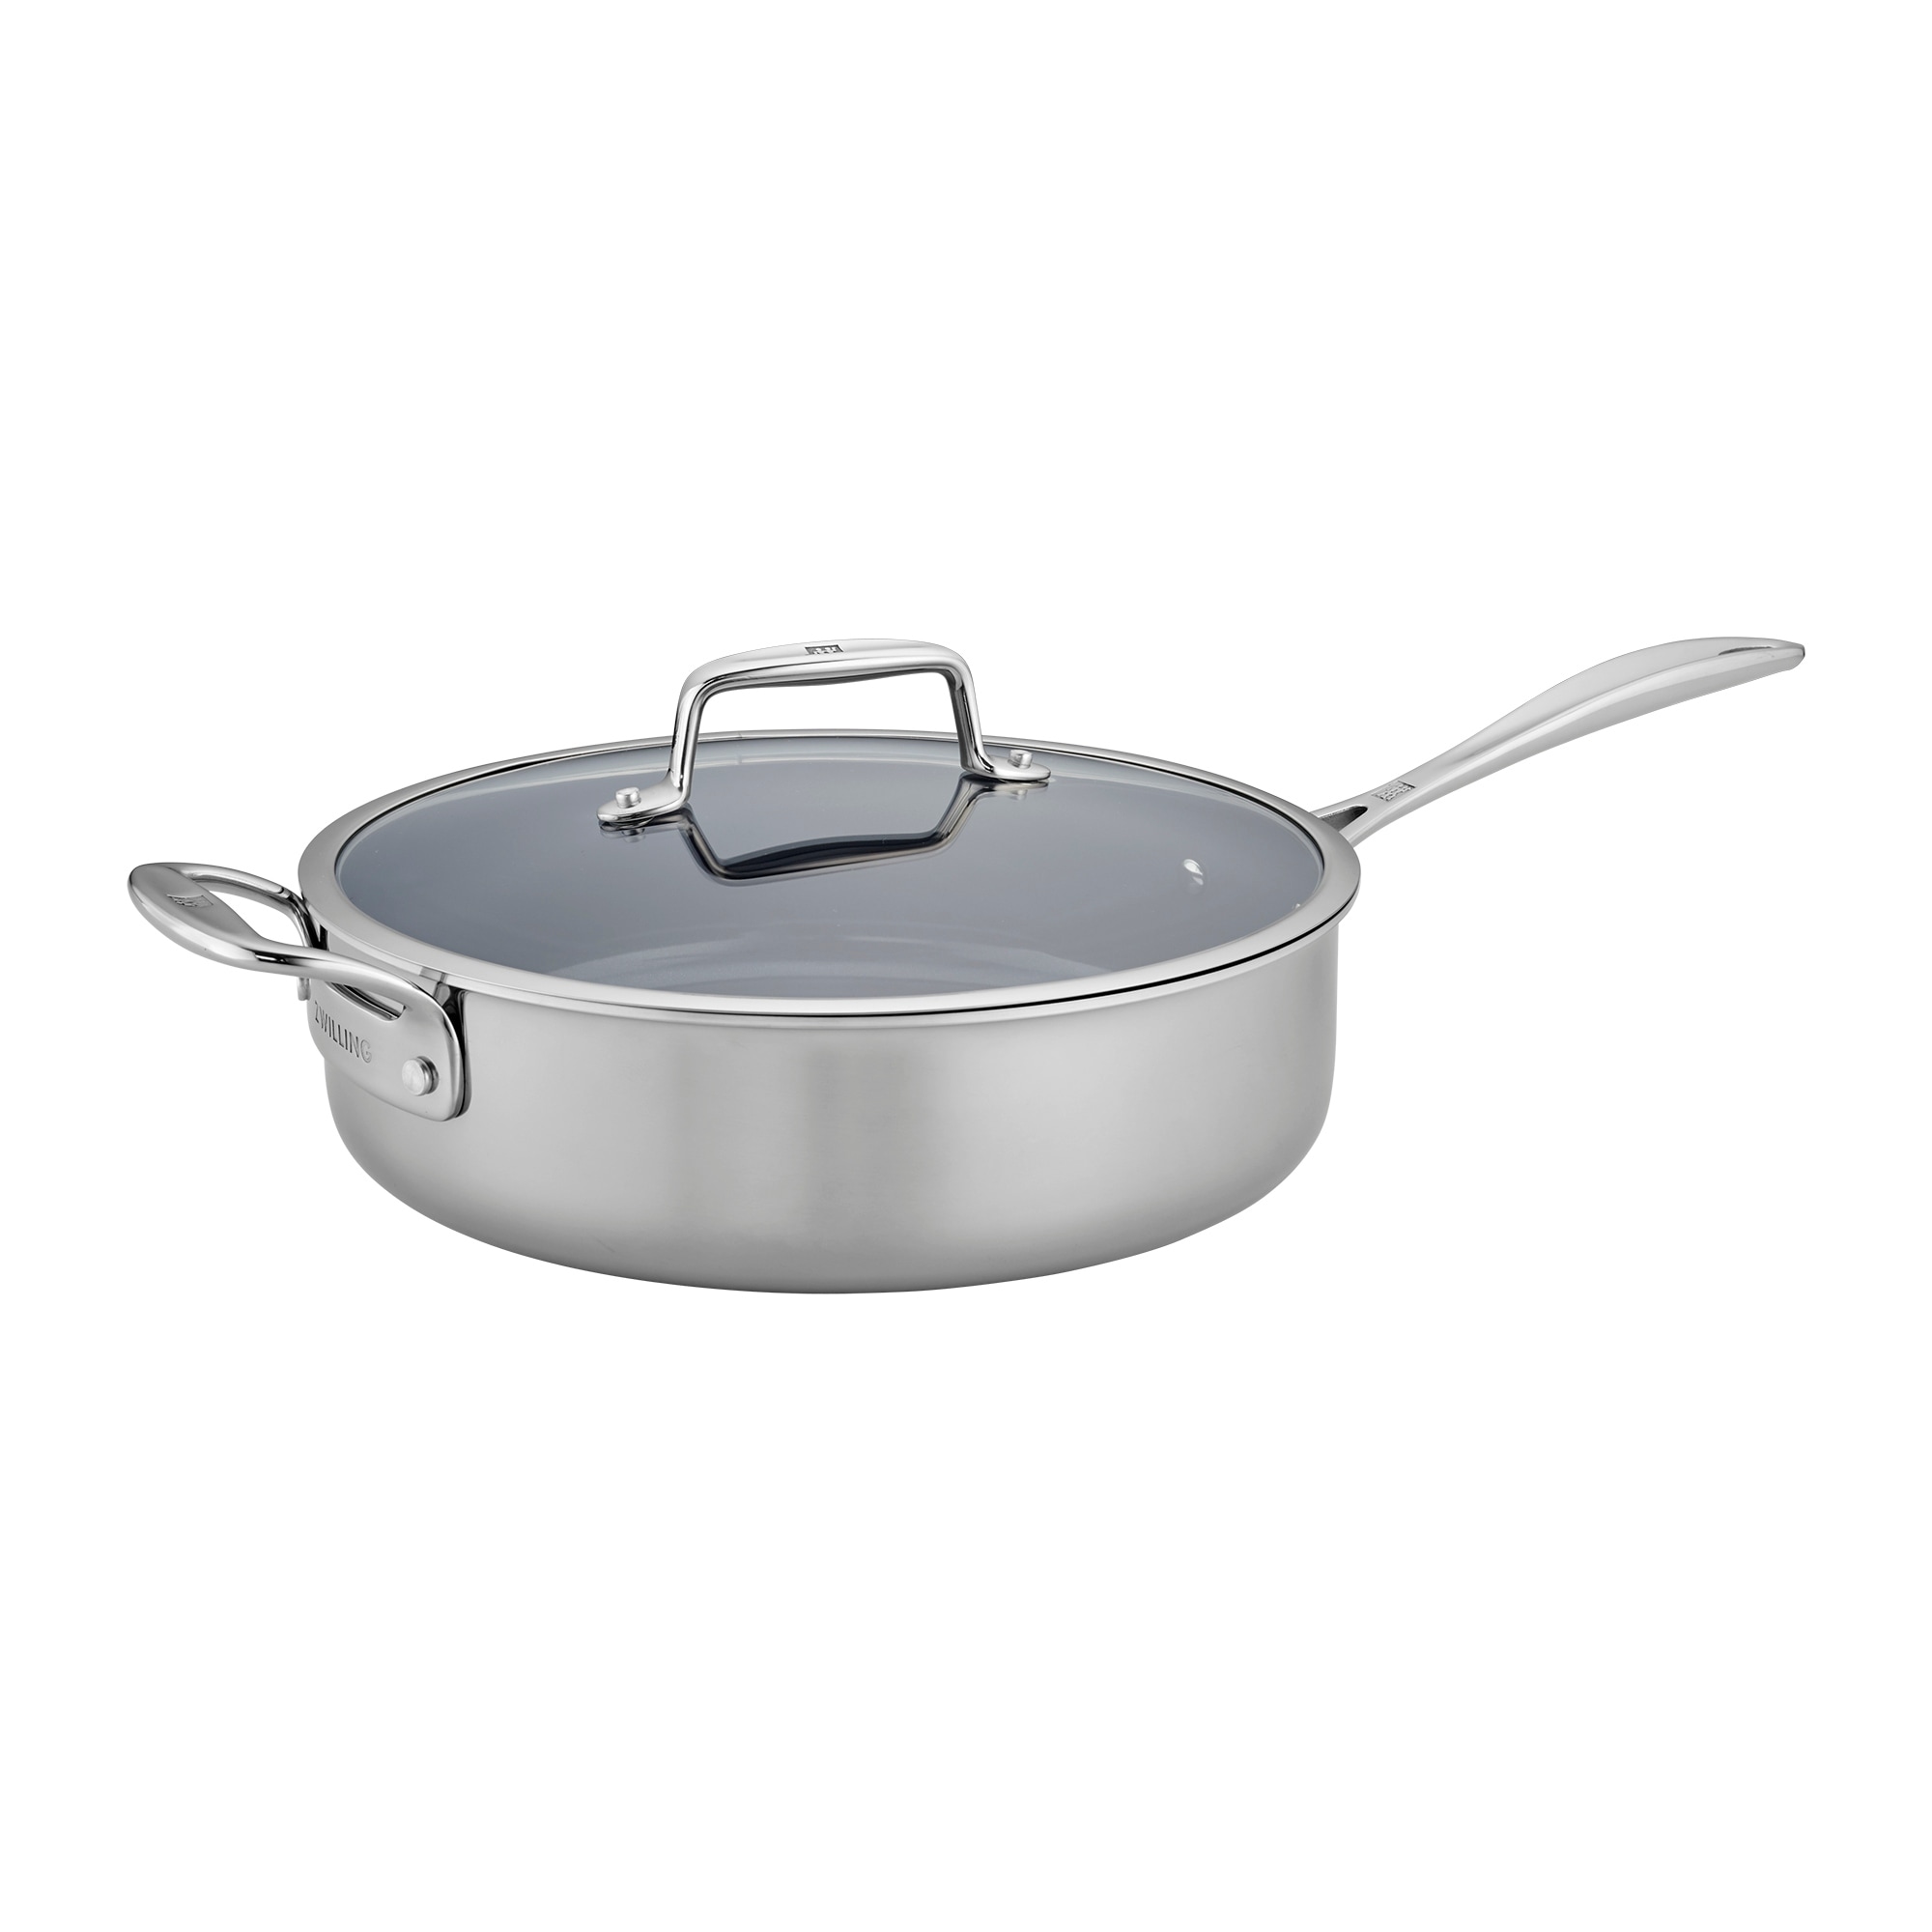 Cuisinart/Waring 622-30H 12-Inch Open Skillet Anodized - Non-Stick